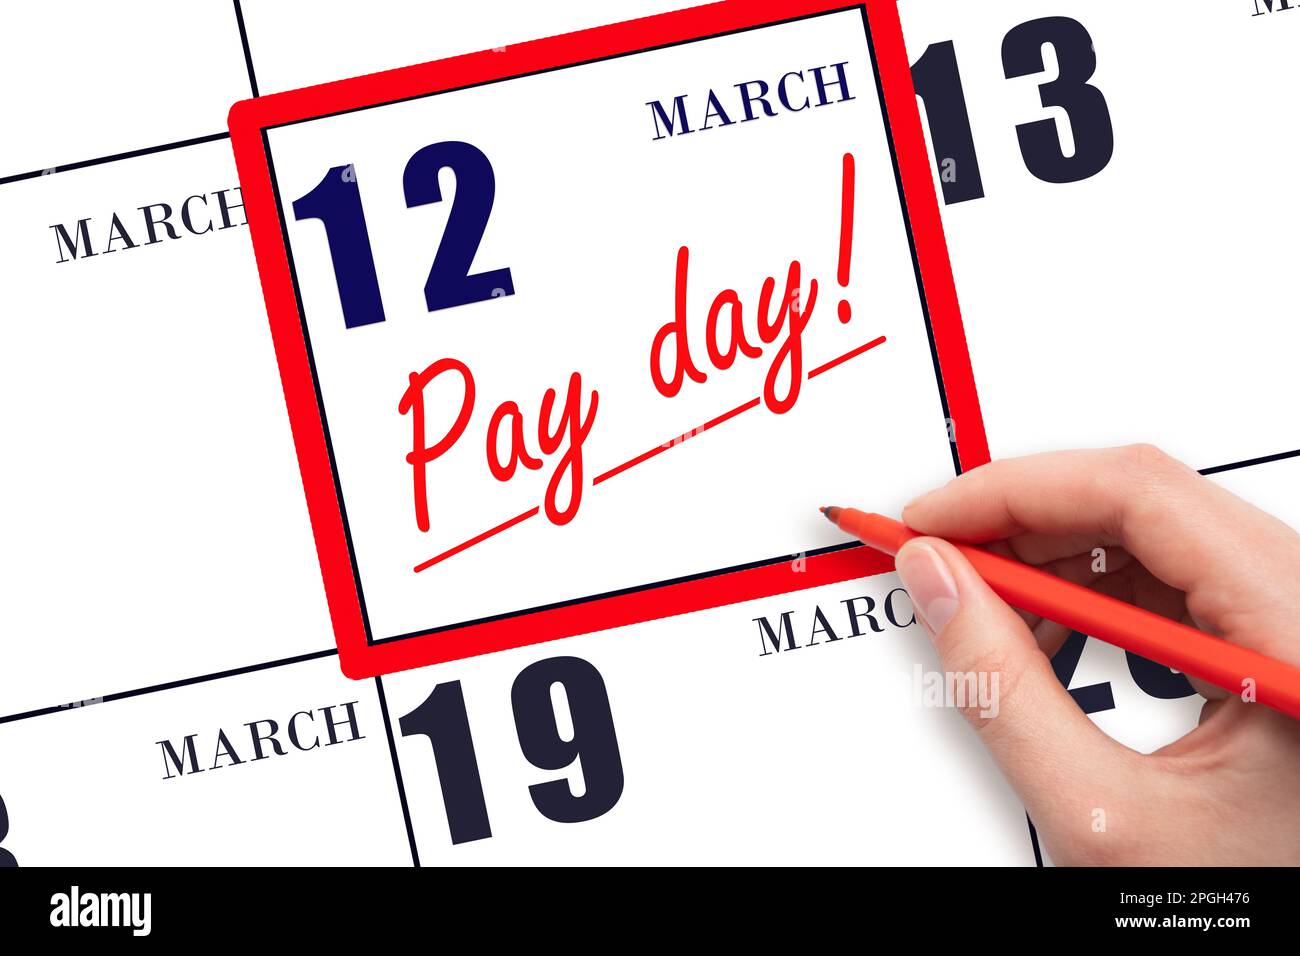 12th day of March. Hand writing text PAY DATE on calendar date March 12 and underline it. Payment due date. Reminder concept of payment. Spring month, Stock Photo